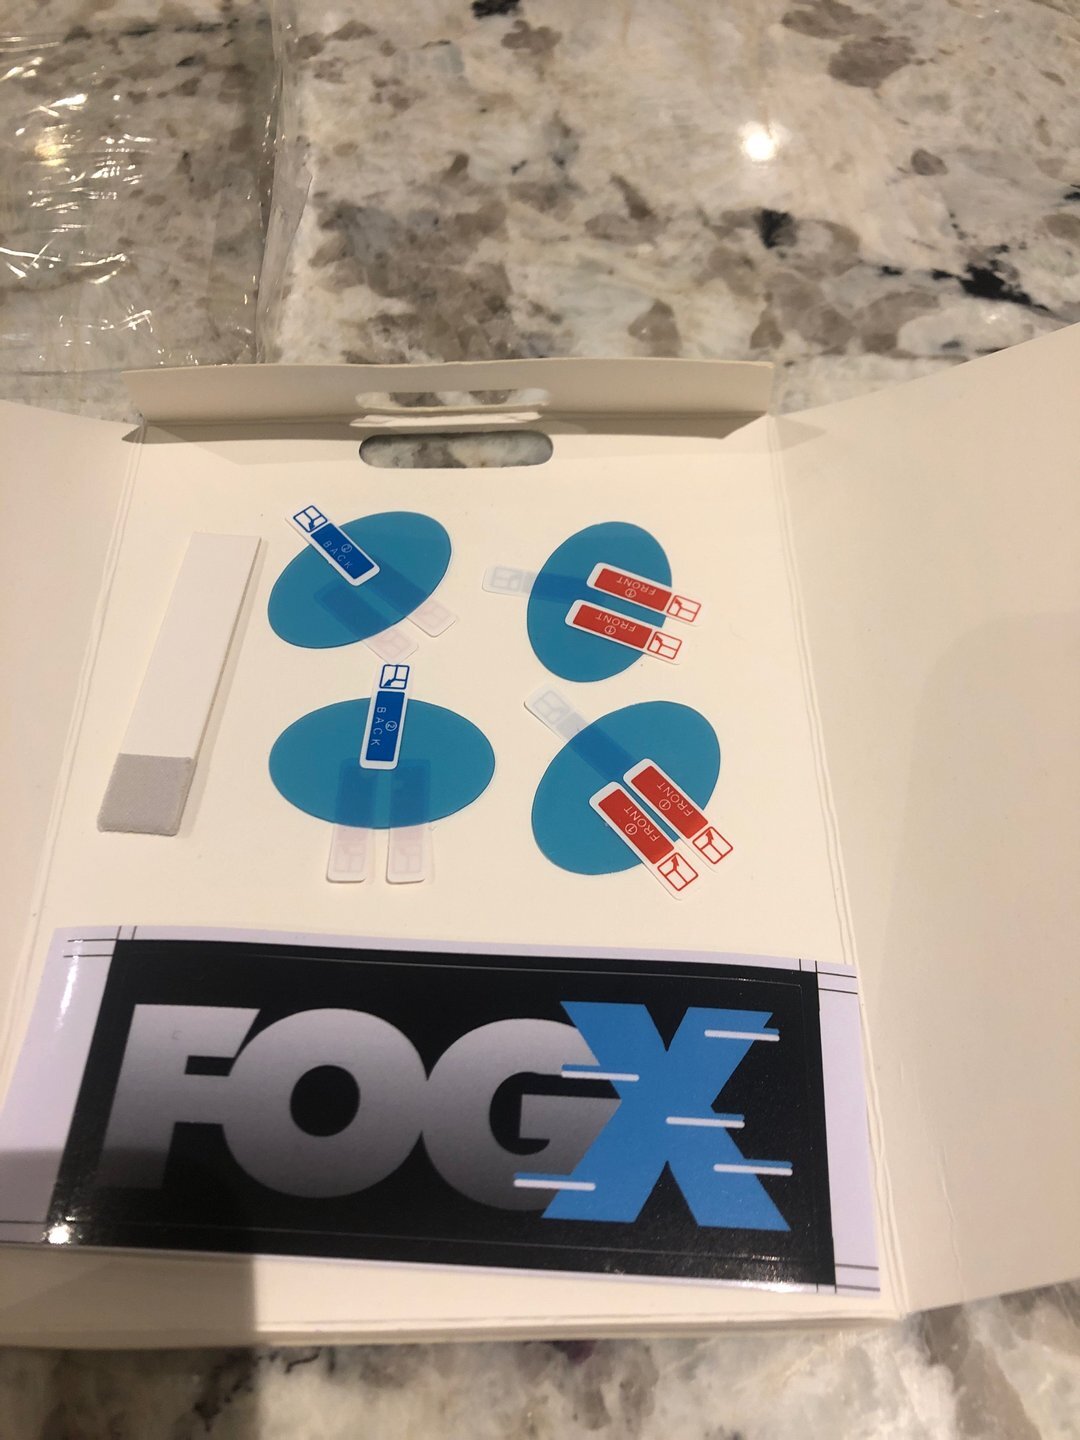 FOG-X package contents